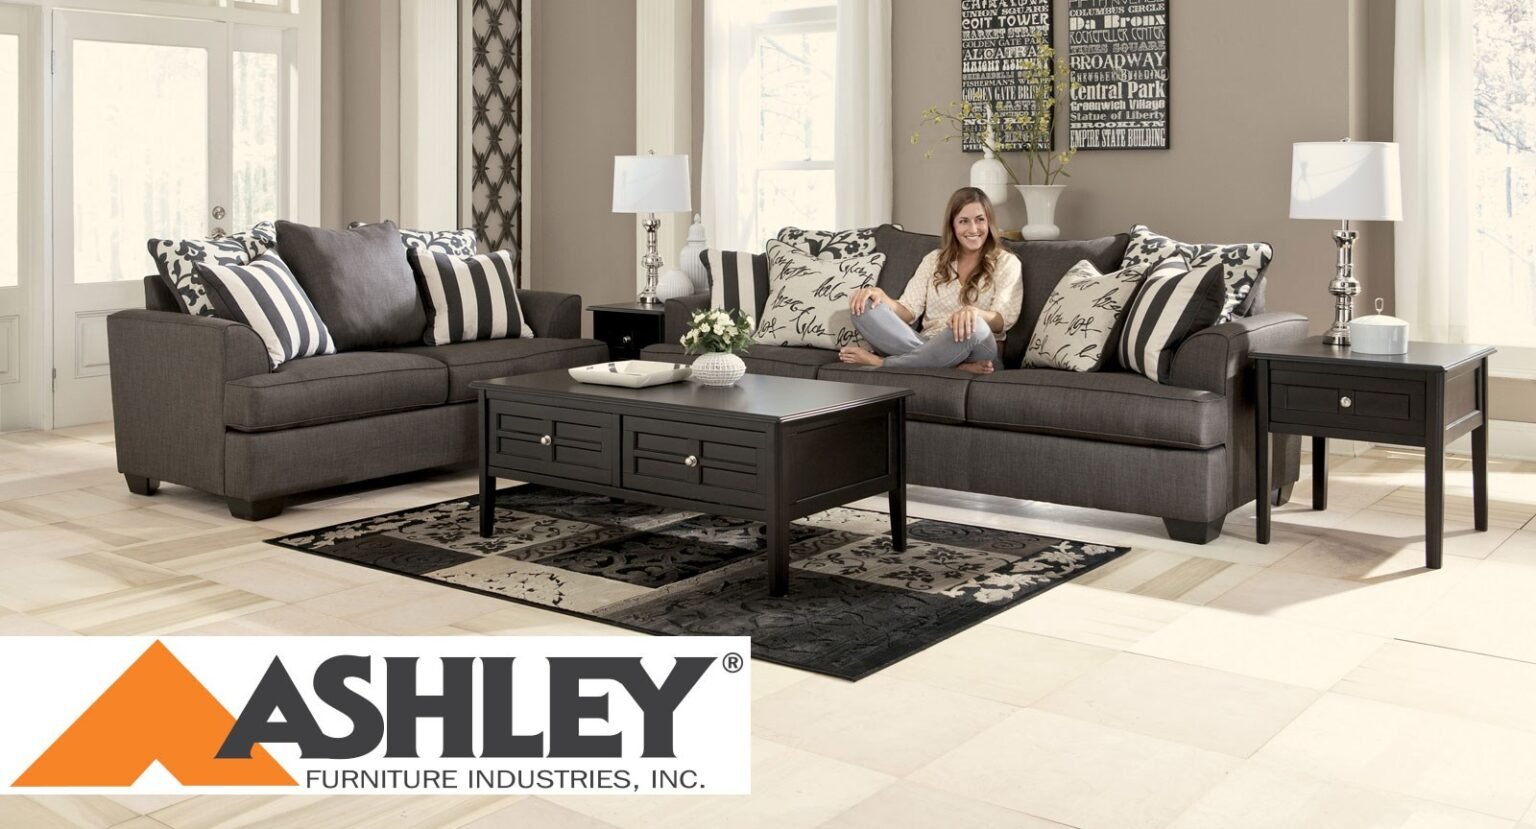 Ashley: Elevating Your Home Decor with Exquisite Furniture and Stylish Accents